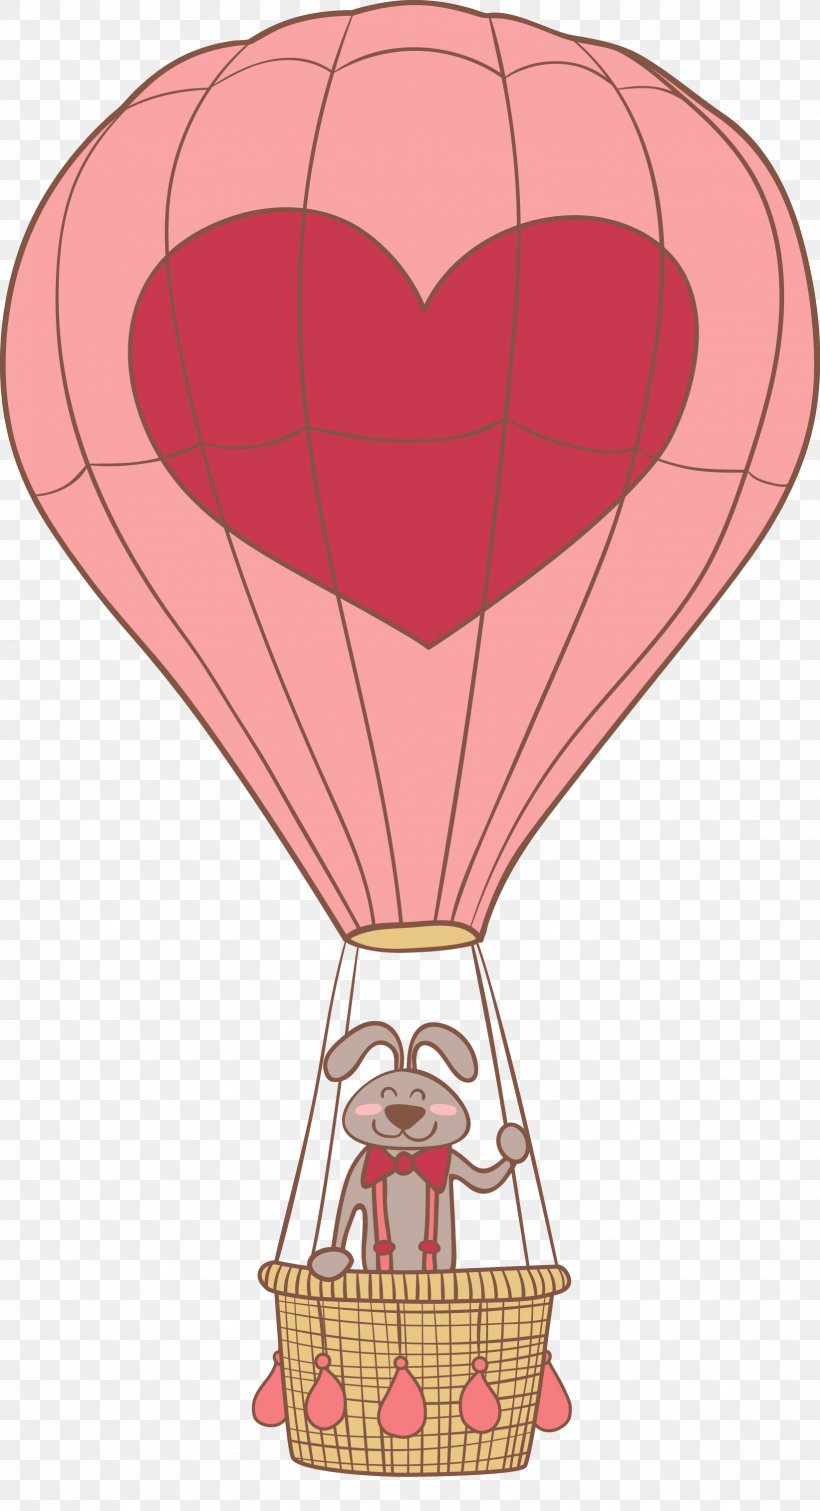 Hot Air Balloon Euclidean Vector, PNG, 1643x3029px, Hot Air Balloon, Balloon, Heart, Hot Air Ballooning, Valentines Day Download Free